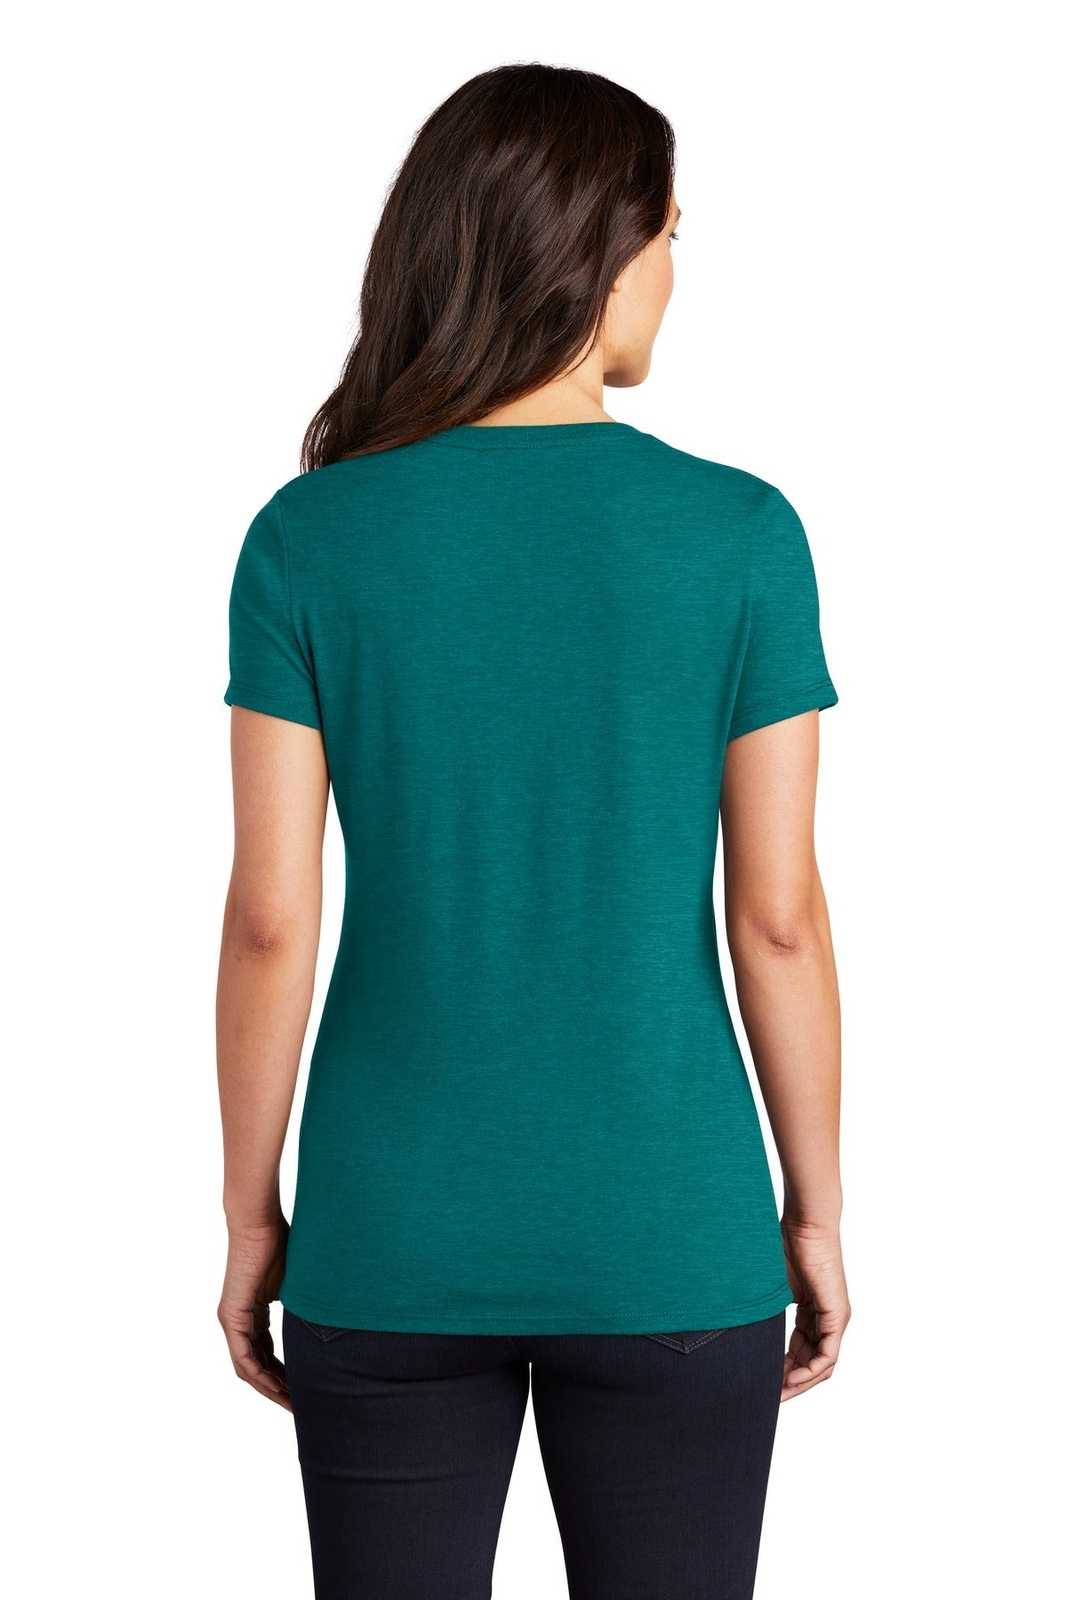 District DM130L Women's Perfect Tri Tee - Heathered Teal - HIT a Double - 1